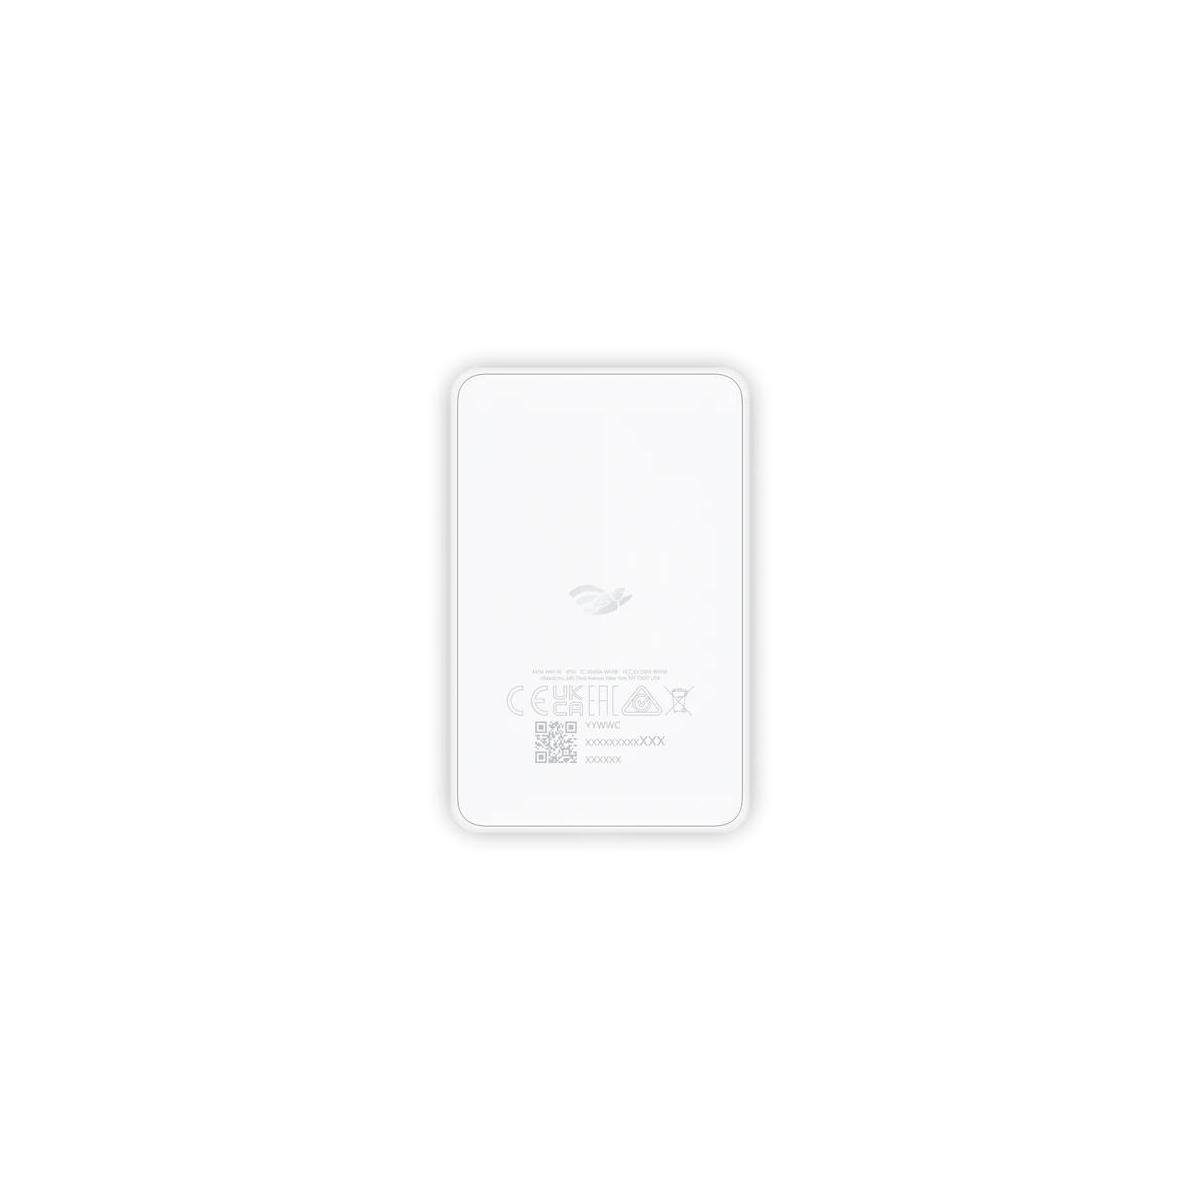 Networks WiFiMan-Assistent Ubiquiti WLAN-Antenne